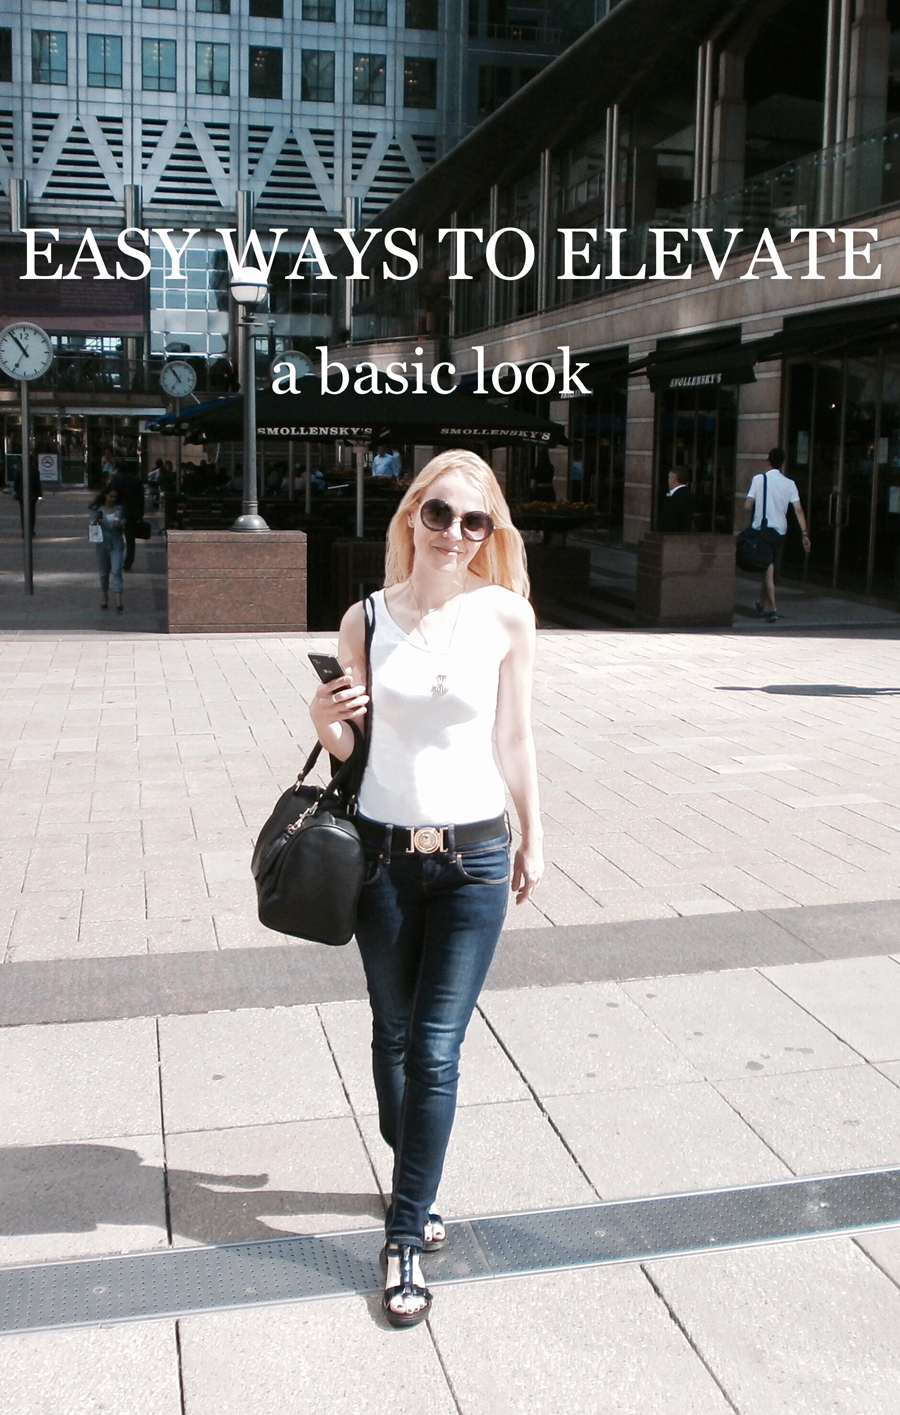 chic-basic-failsafe-look-weekend-london-epic-street-style